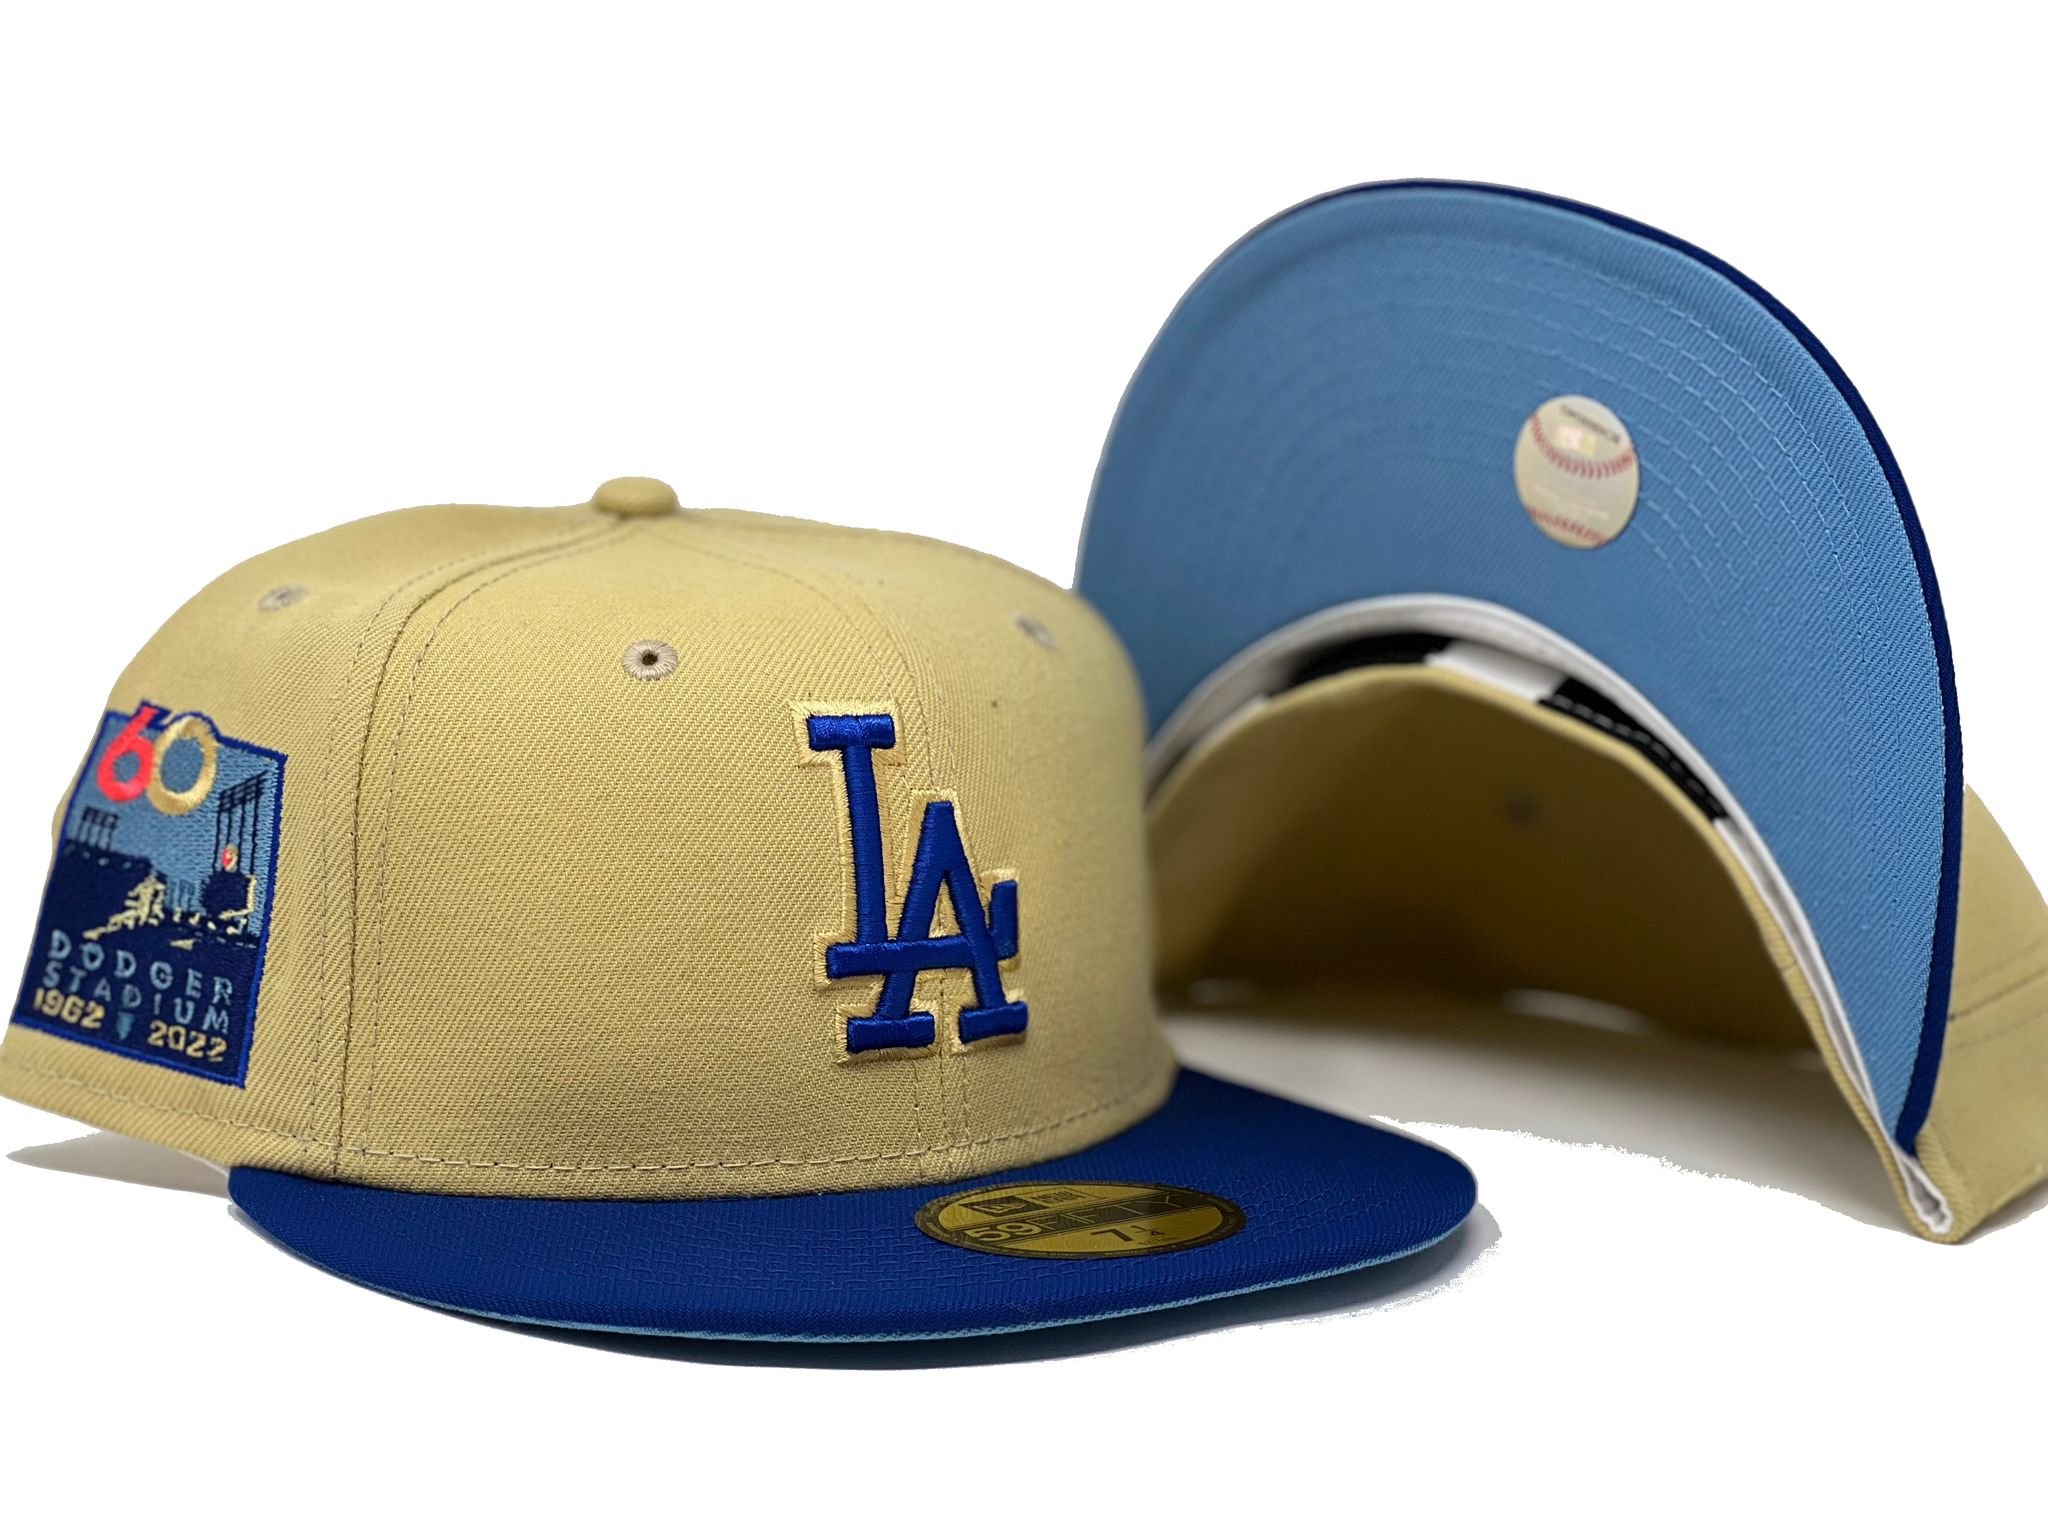 MLB Gold Jerseys, Gold Collection Gear, Gold Hats